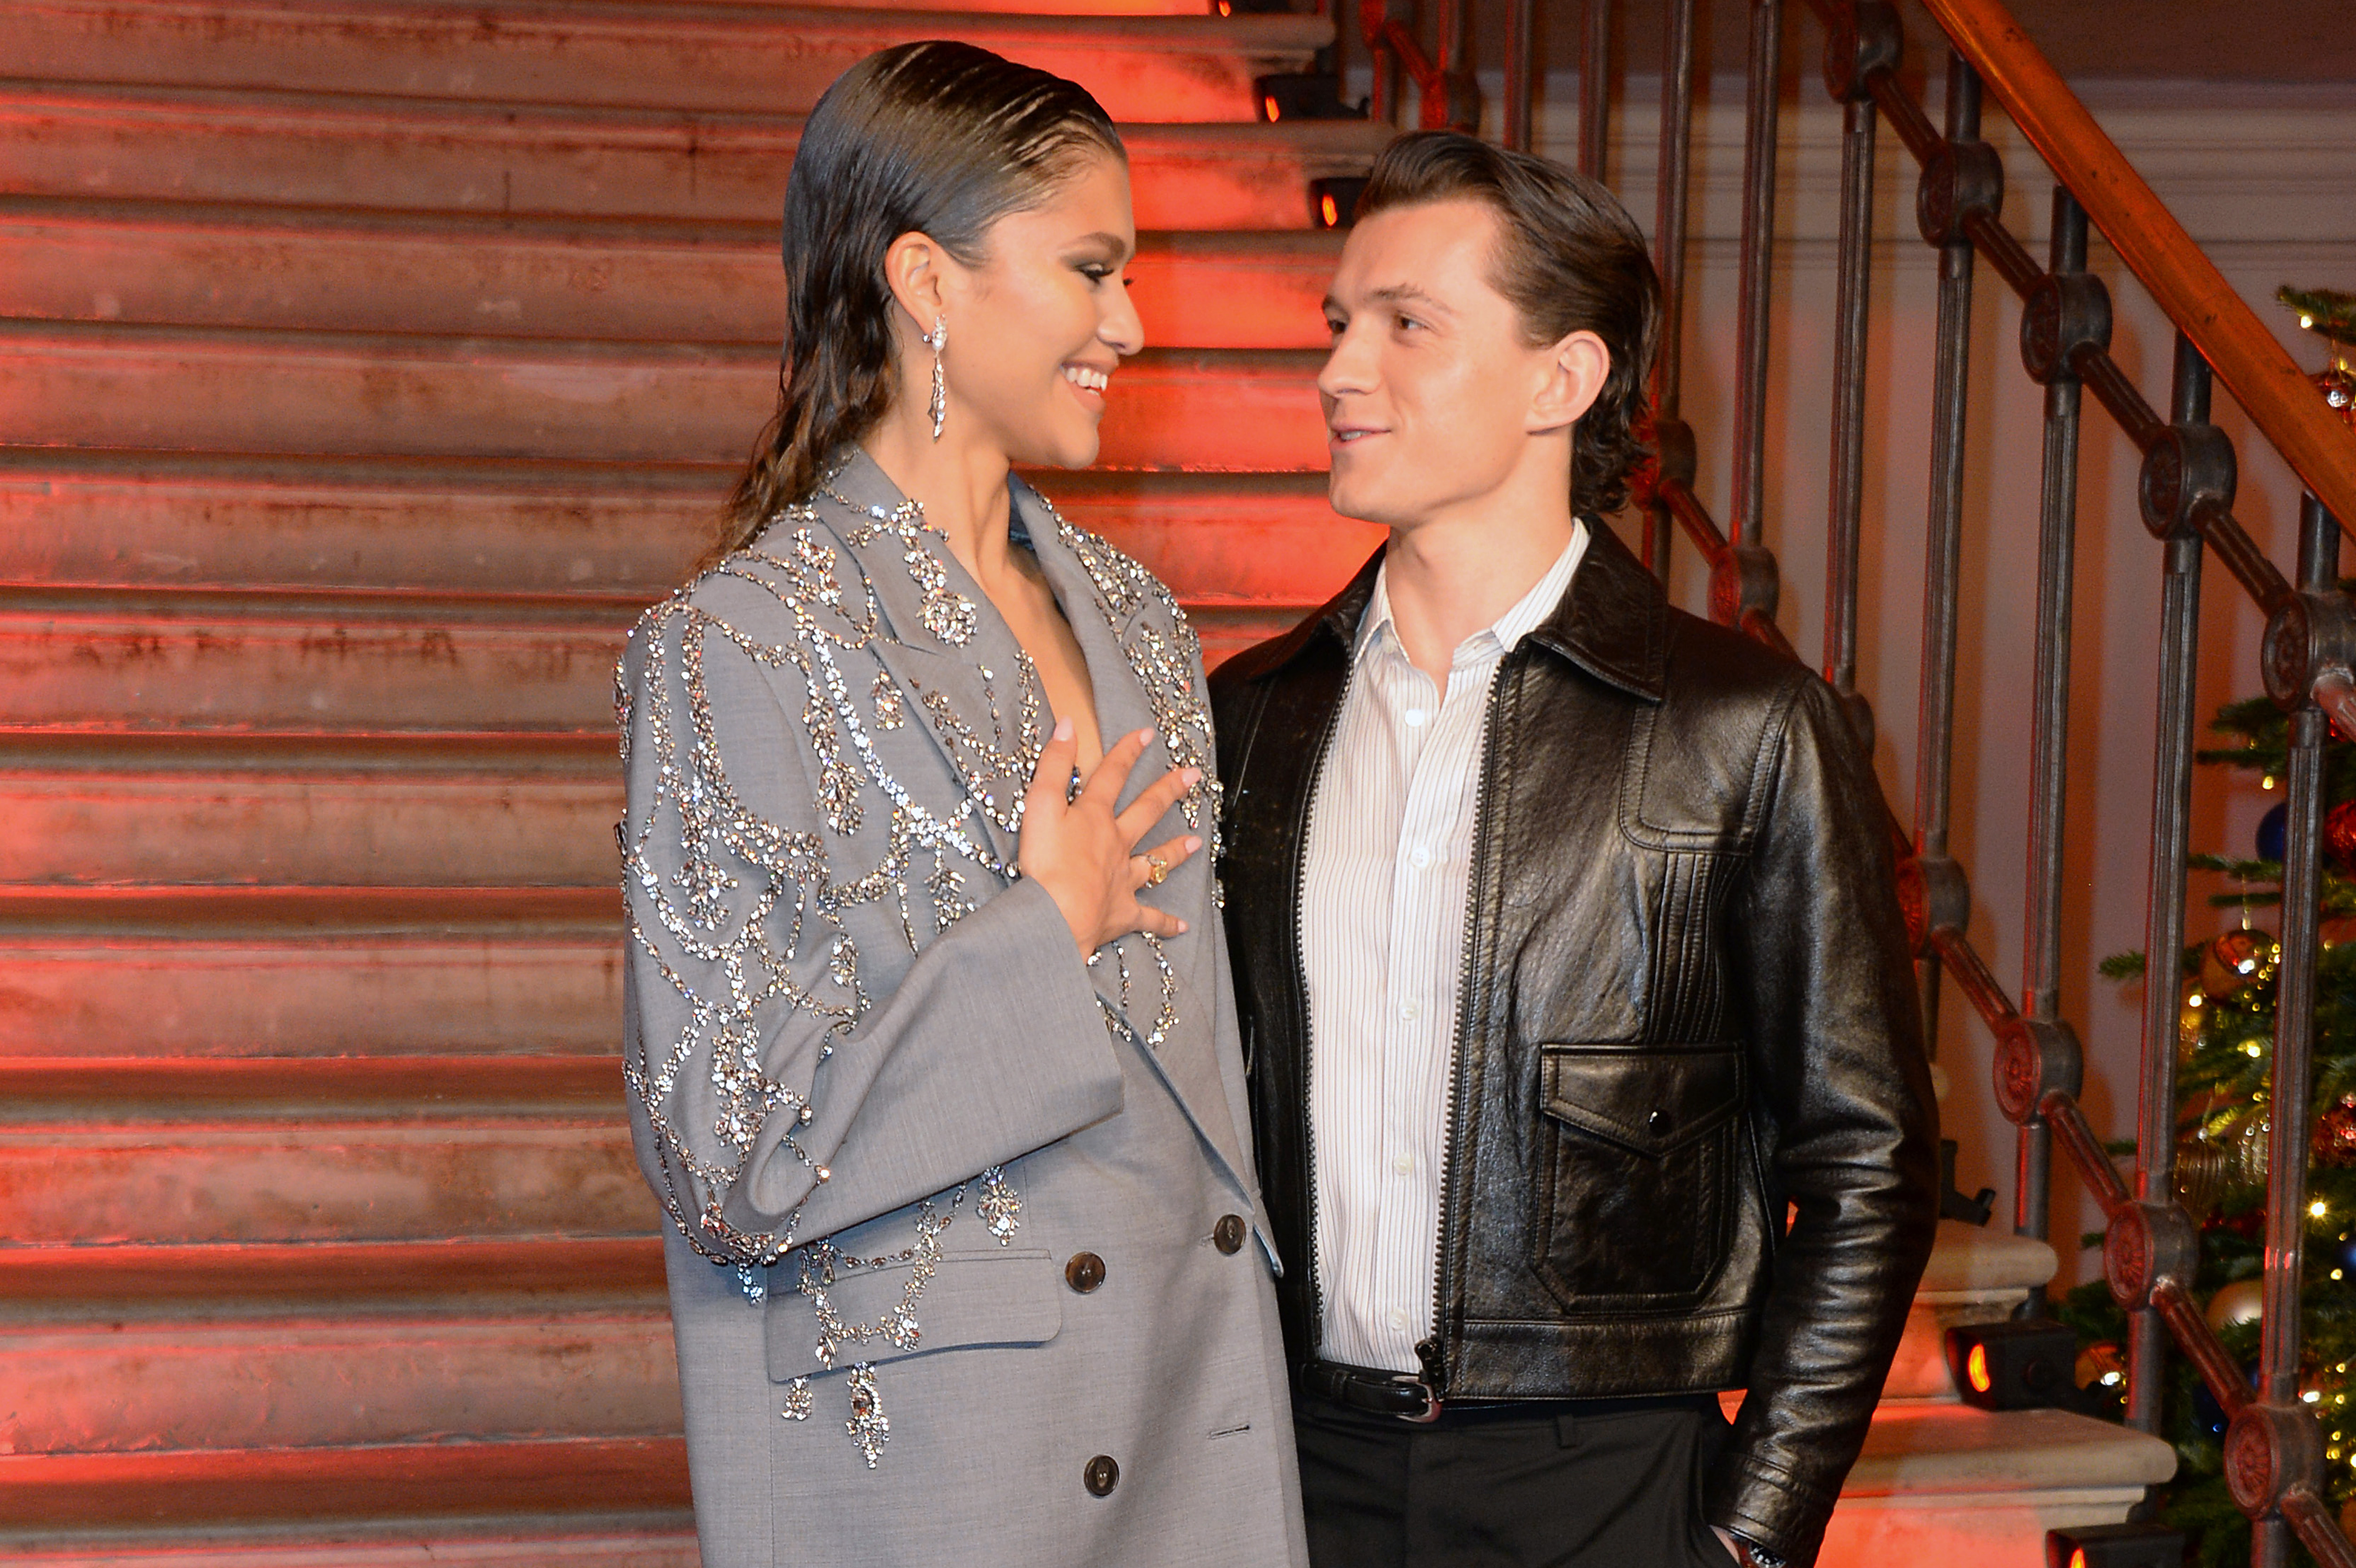 Zendaya and Tom Holland pose at a photocall for "Spider-Man: No Way Home" at The Old Sessions House in London, England, on December 5, 2021. | Source: Getty Images